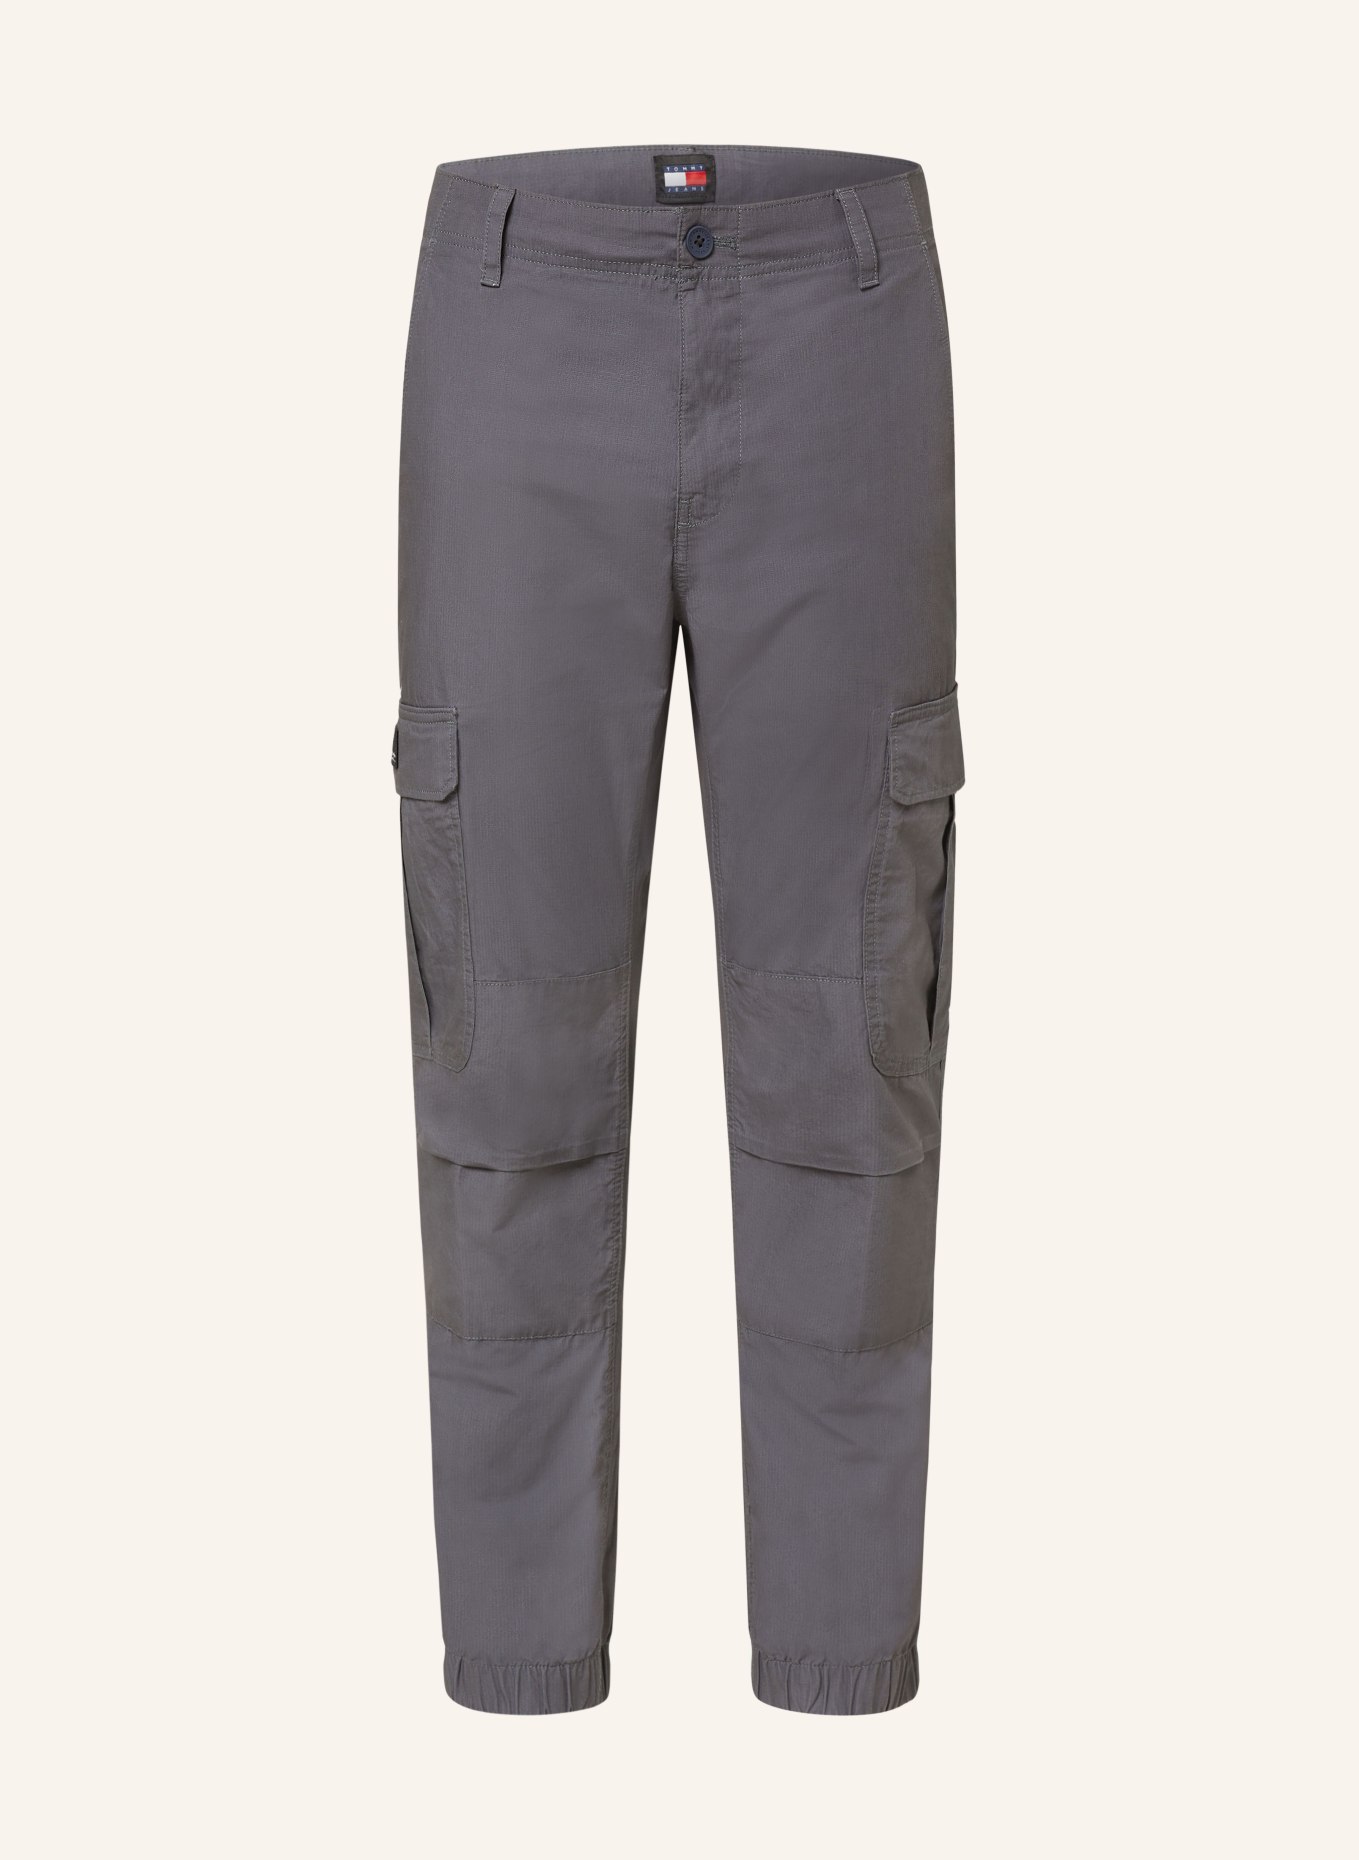 TOMMY JEANS Cargohose ETHAN Relaxed Fit, Farbe: PT2 Washed Black (Bild 1)